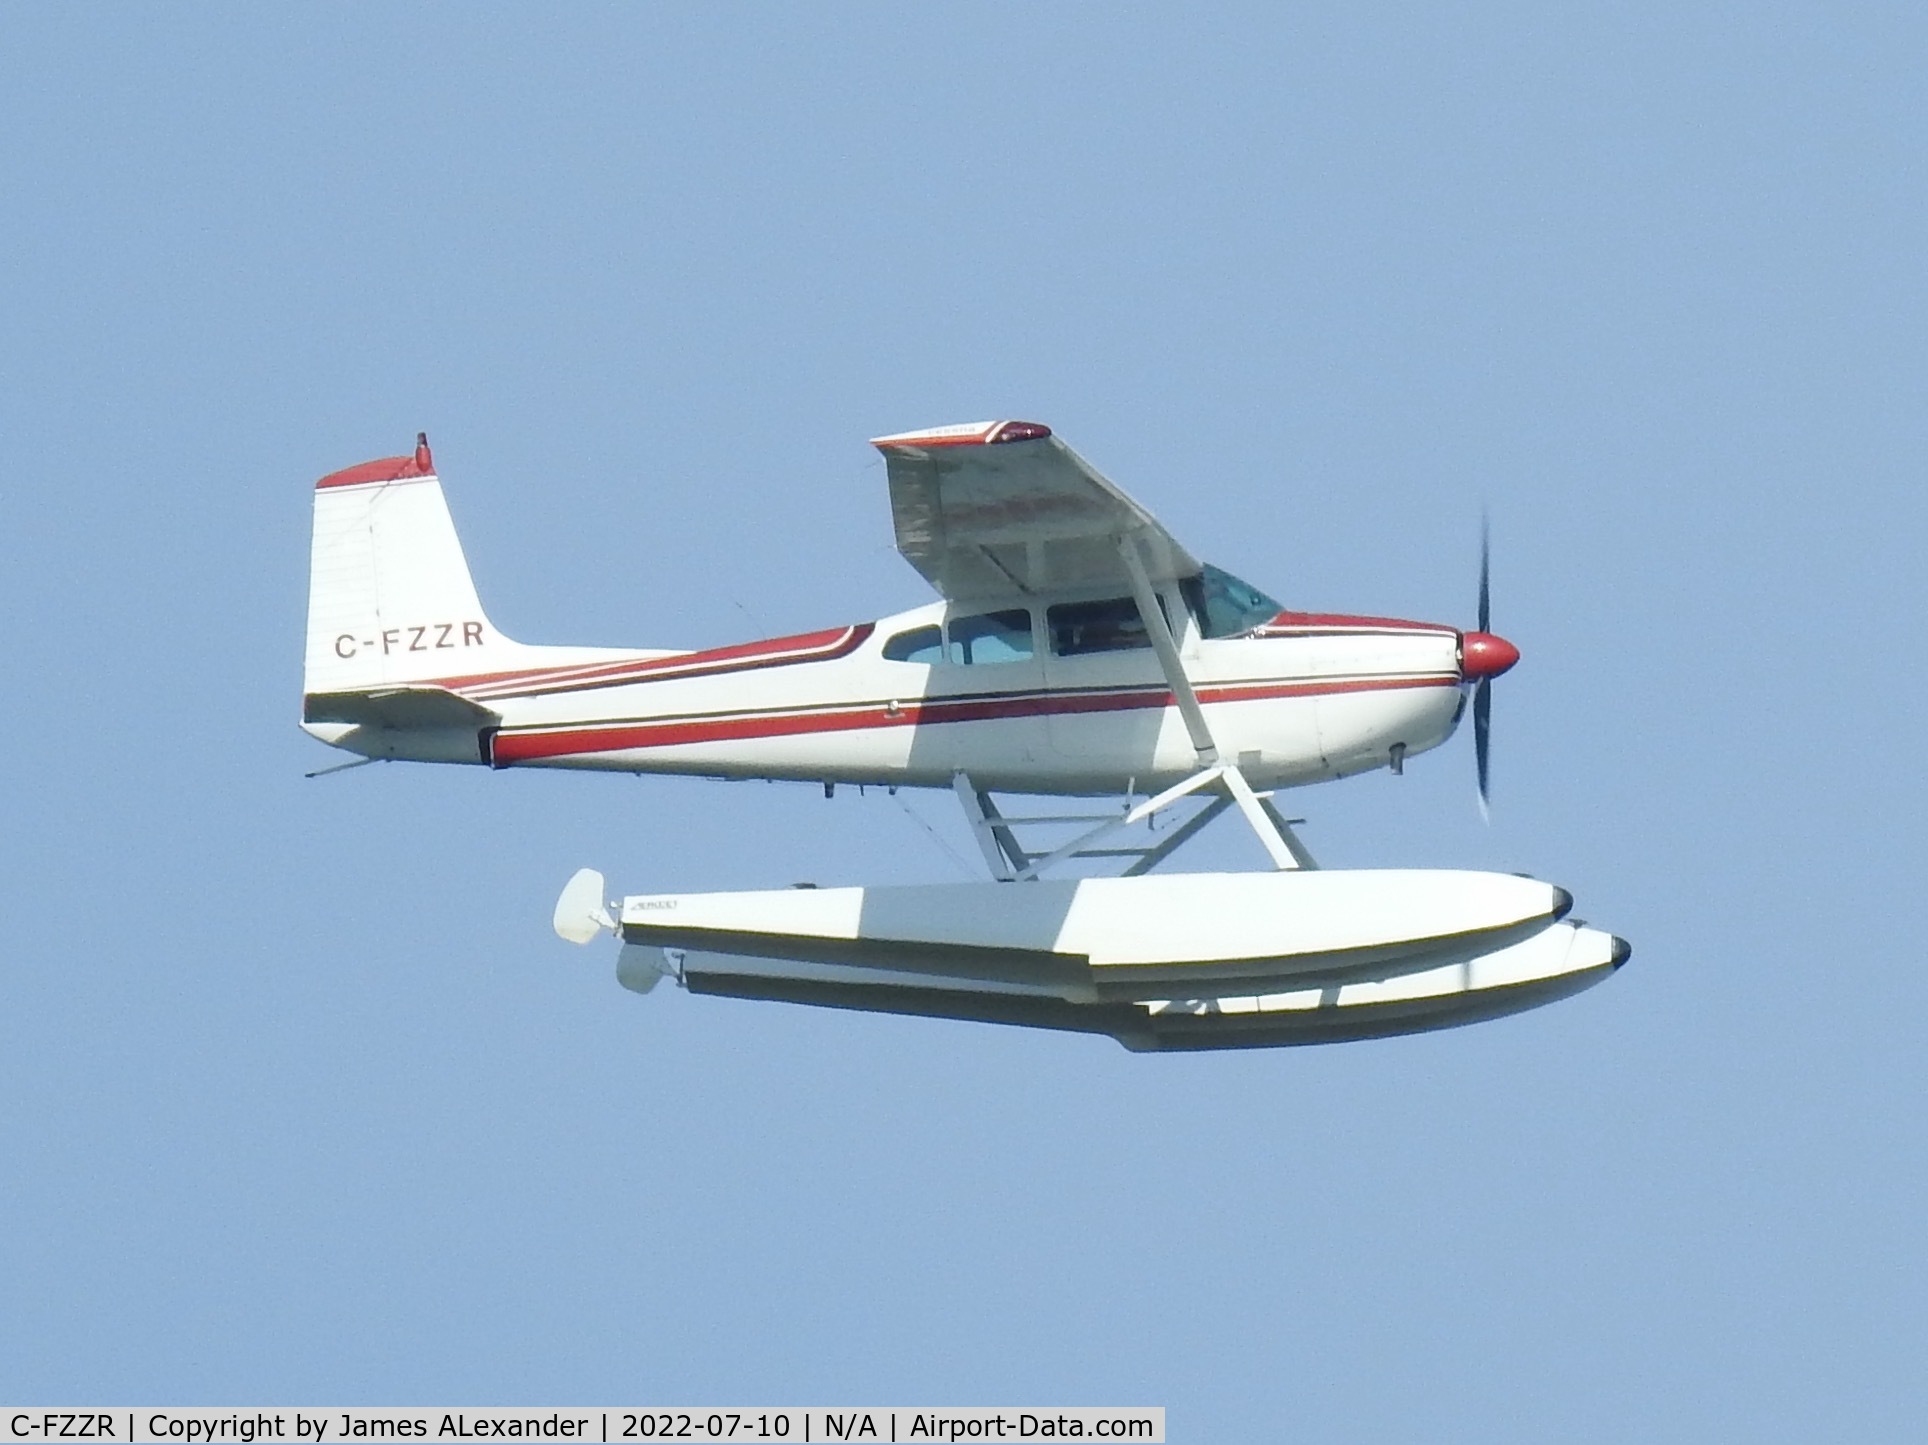 C-FZZR, 1964 Cessna 180G C/N 18051394, In flight south-west of Carleton Place, ON Canada